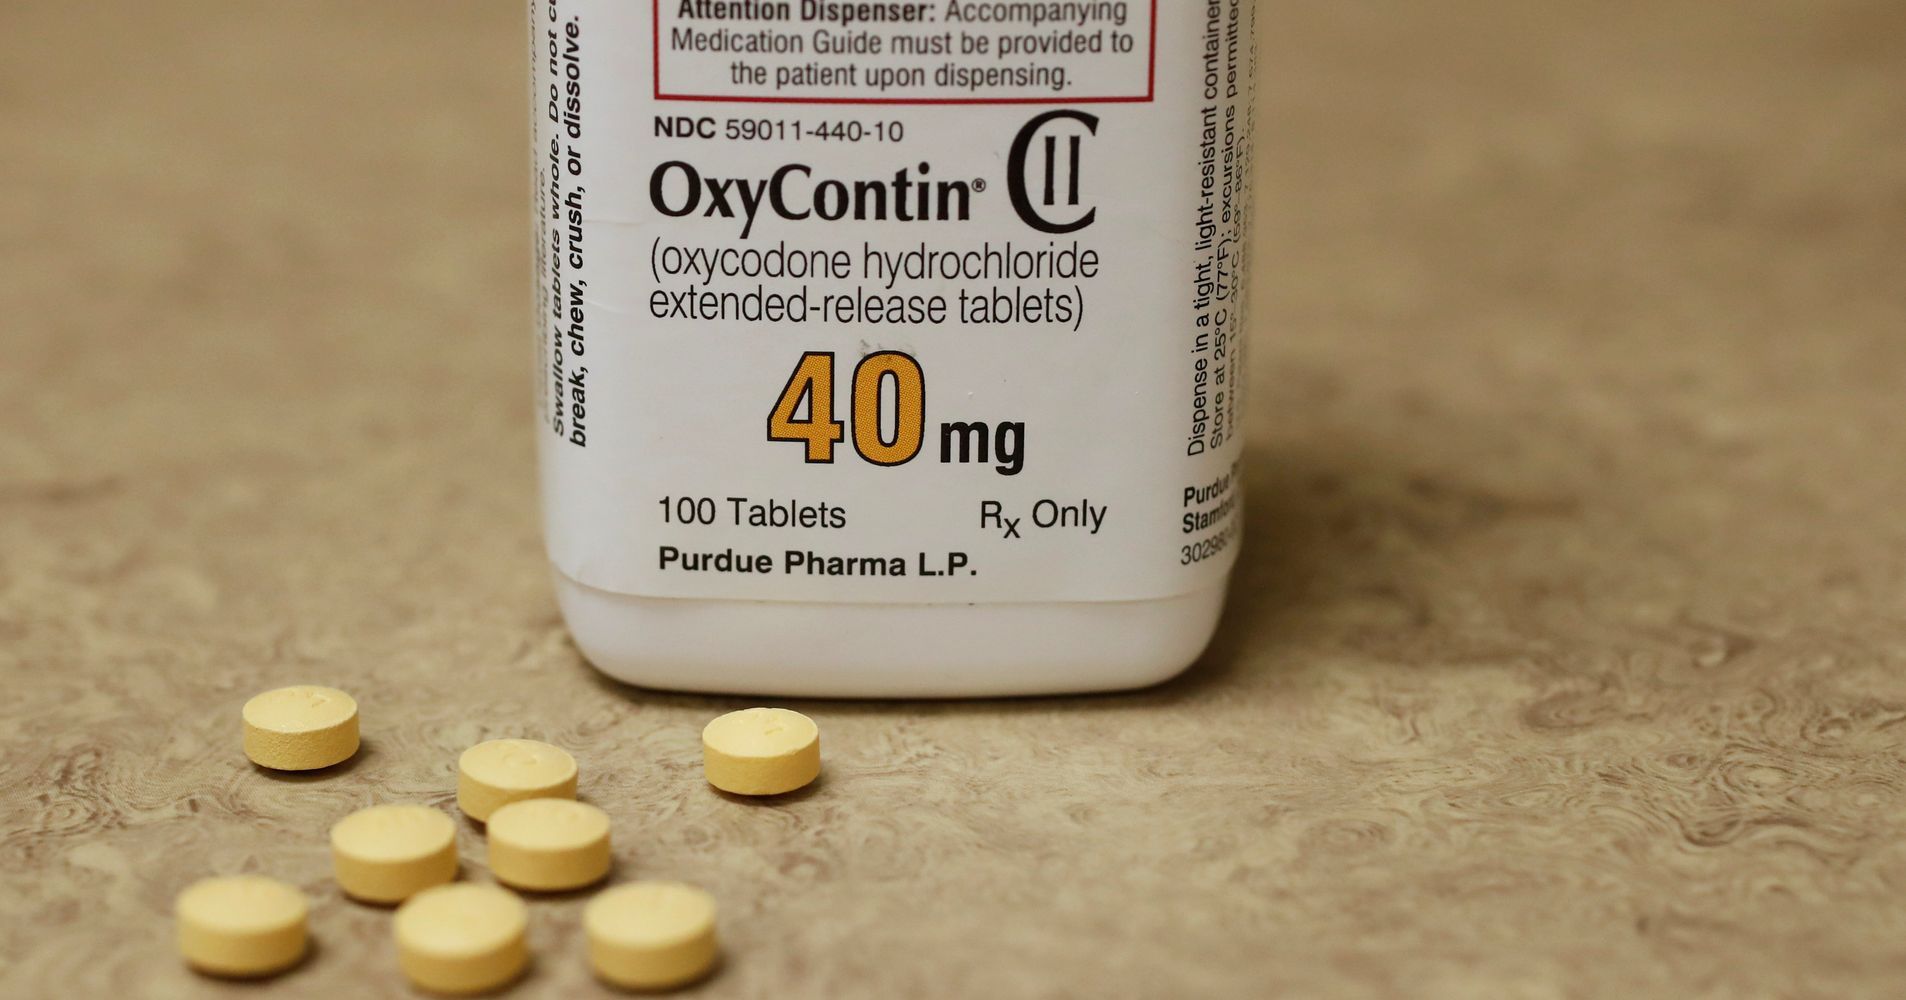 oxycontin-drugmaker-vows-to-stop-promoting-opioids-to-doctors-huffpost